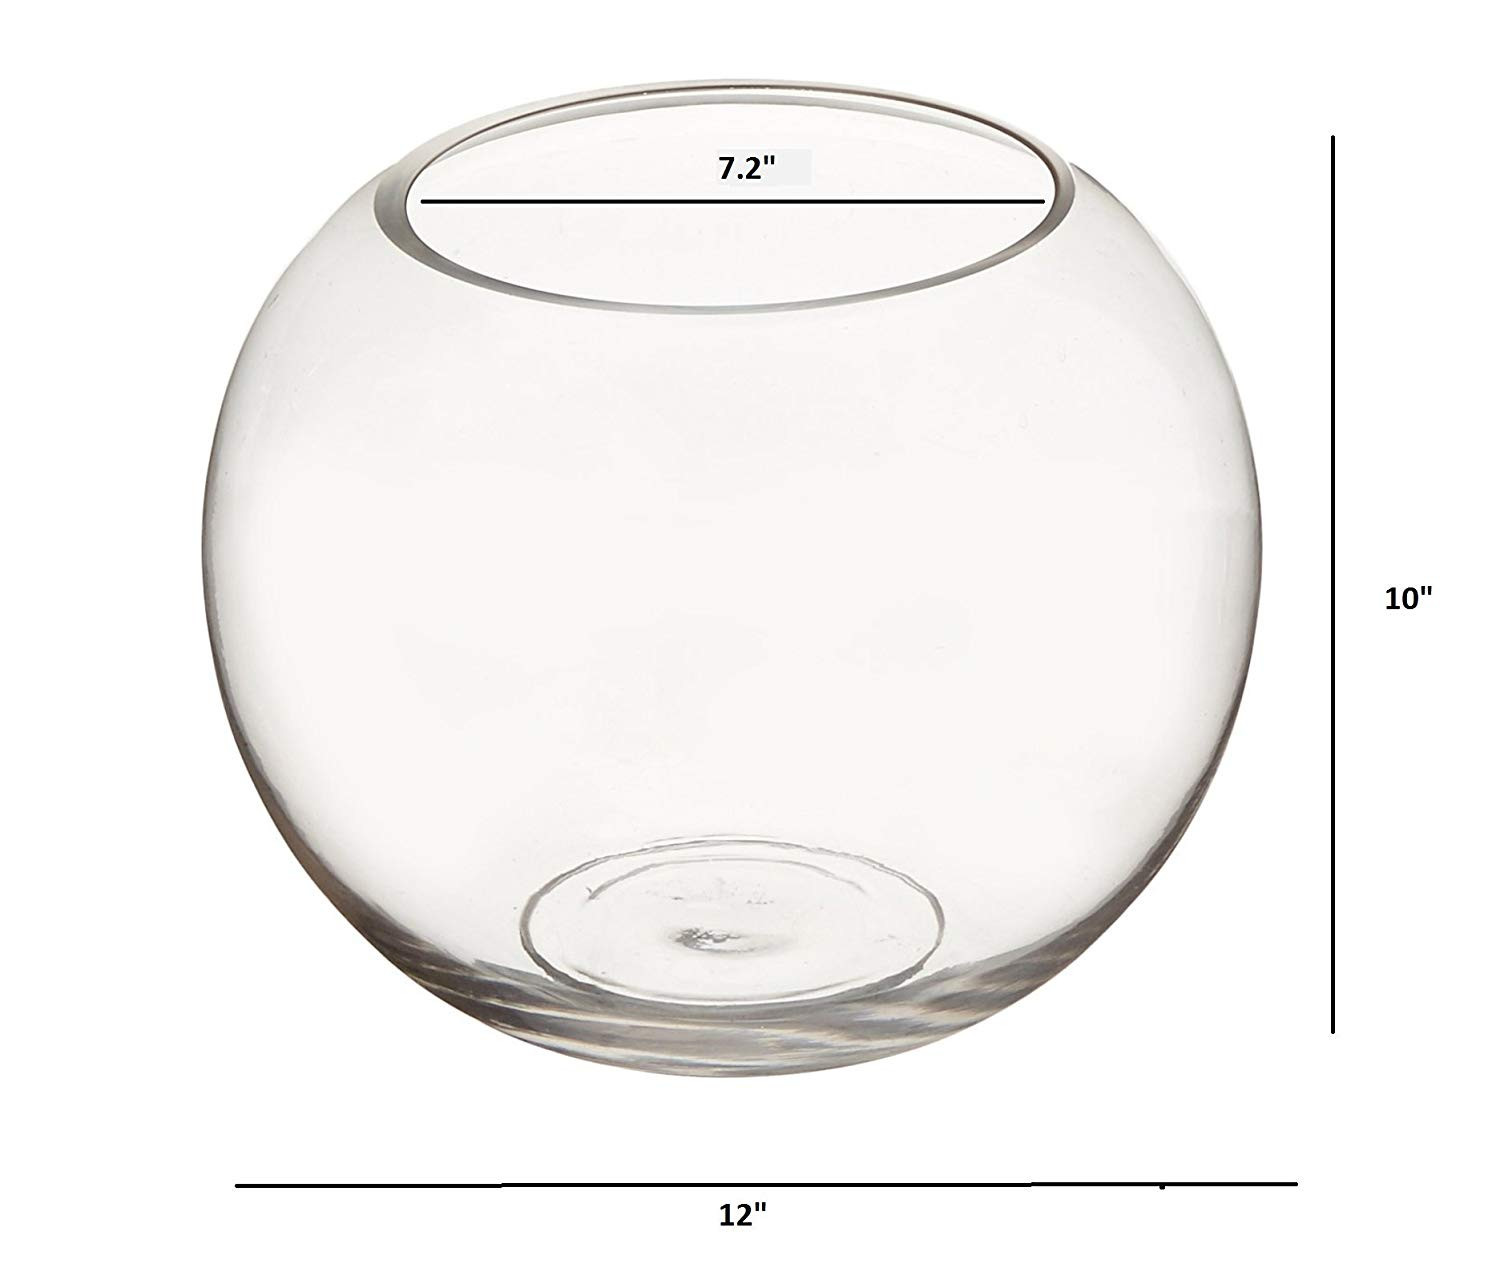 24 Best Libbey Clear Cylinder Bud Vase 2024 free download libbey clear cylinder bud vase of amazon com candles4less 12 x 10 inch large clear glass bubble with amazon com candles4less 12 x 10 inch large clear glass bubble bowl vases set of 2 home ki